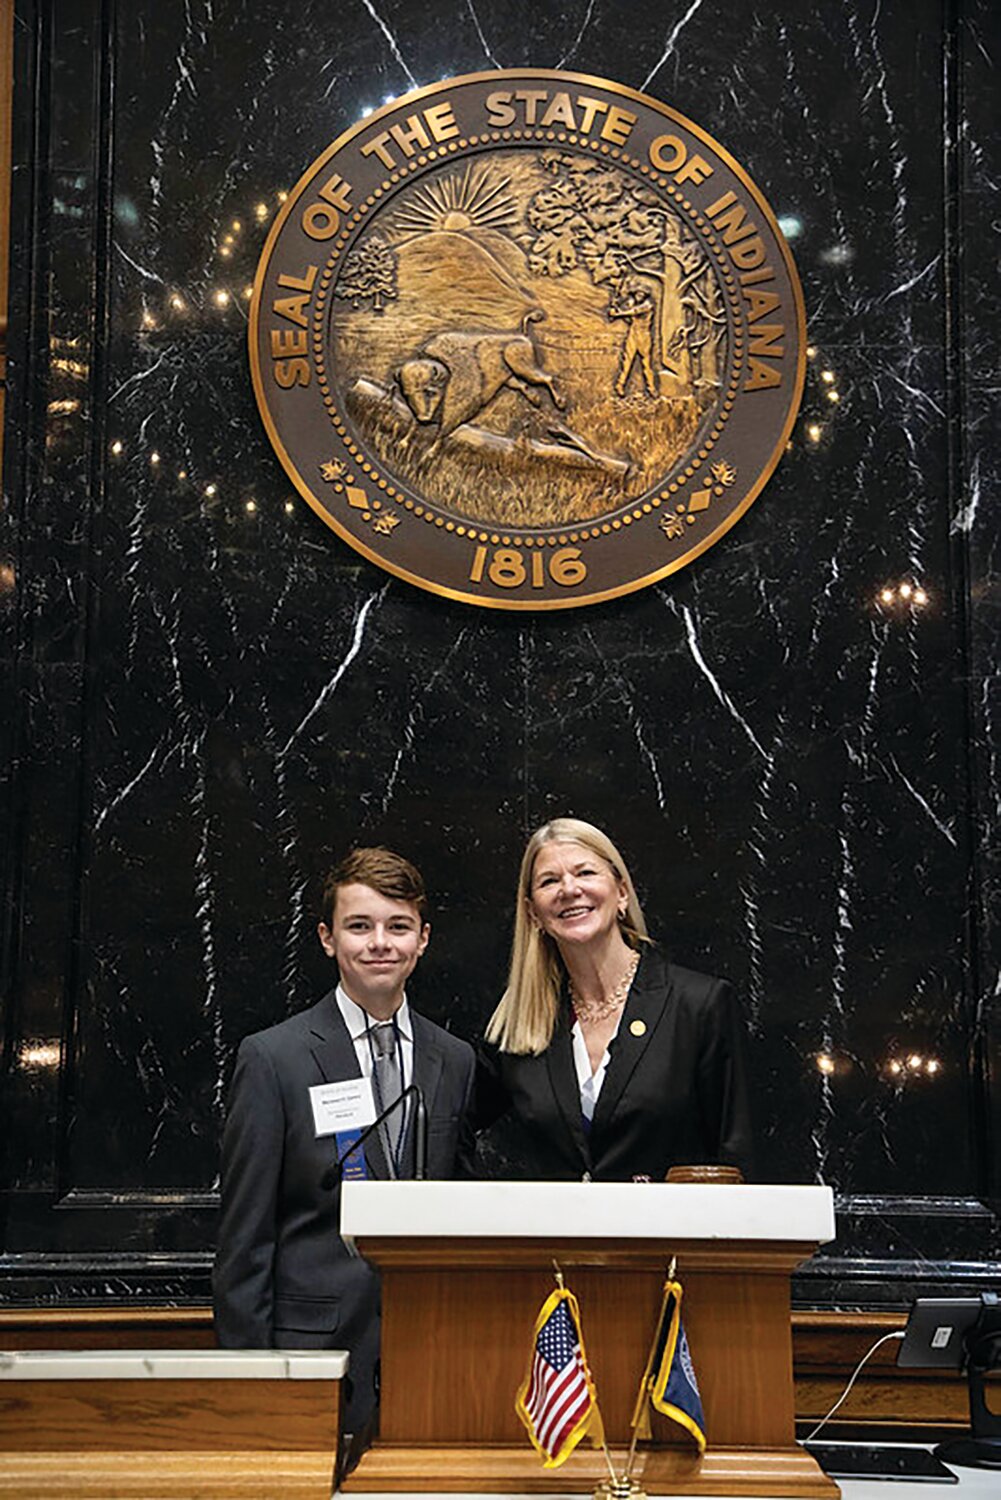 State Rep. Sharon Negele (R-Attica) recently welcomed Bennett Oppy from New Richmond, who attends North Montgomery Middle School, to the Statehouse where he participated in the Indiana House Page Program during the 2024 legislative session. As a page, Oppy assisted lawmakers and staff with daily duties, toured offices of all branches of government in the Statehouse, and joined Negele on the House floor to learn about the legislative process. ”Paging at the Statehouse offers a firsthand learning opportunity to students all across Indiana,” Negele said. “I am always excited to show students how our laws are made and how their elected officials are working for them in Indianapolis.”